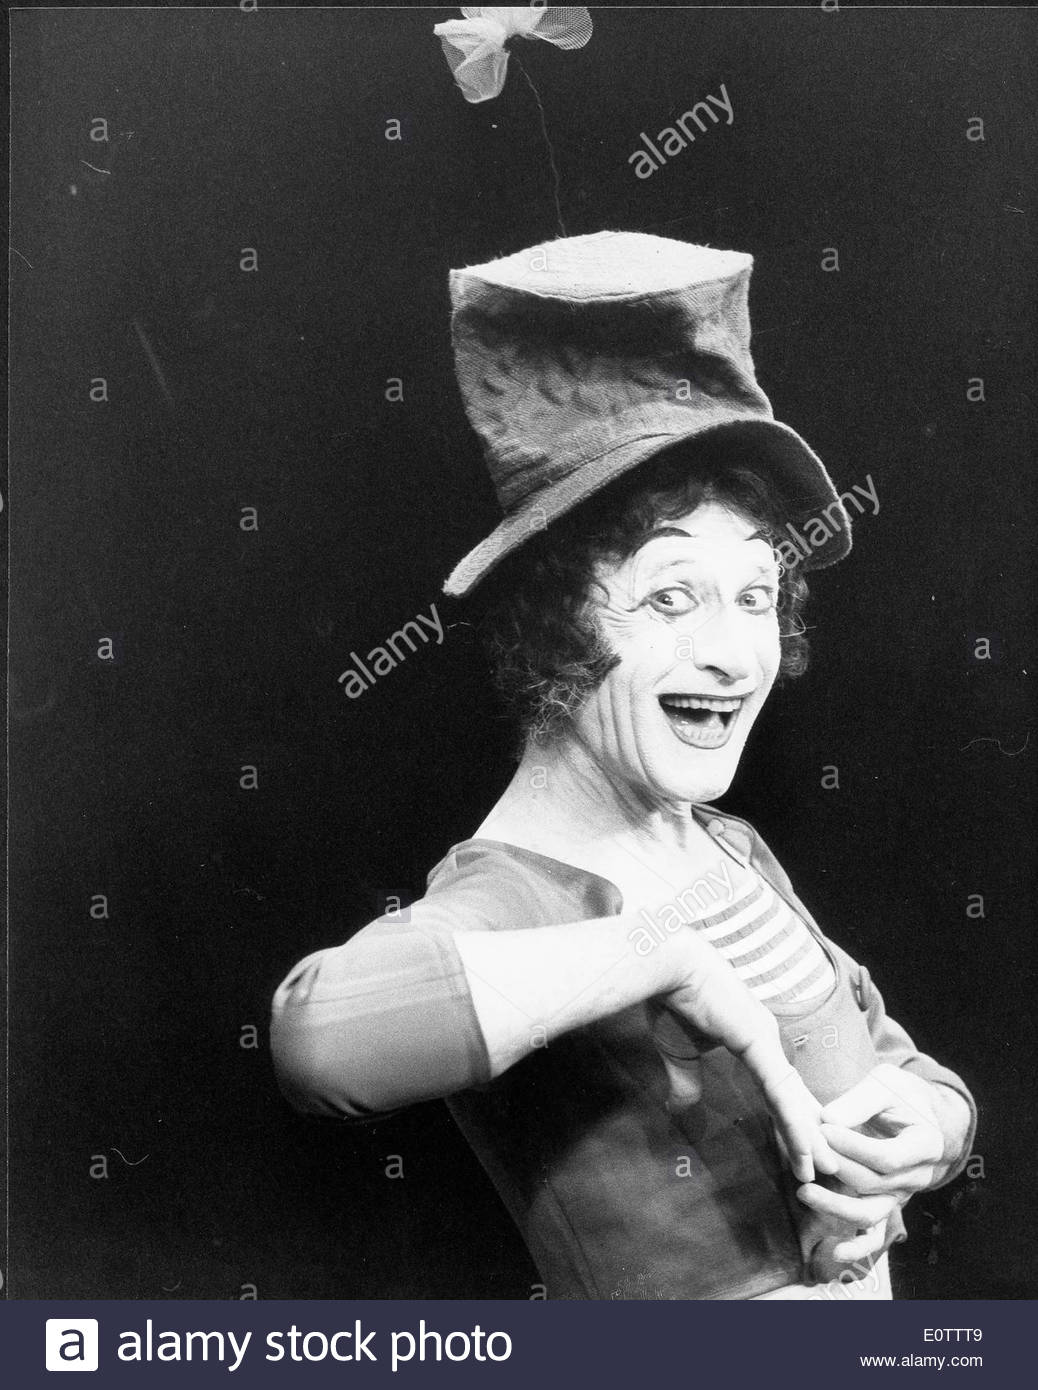 French mime artist and actor Marcel Marceau - Stock Image